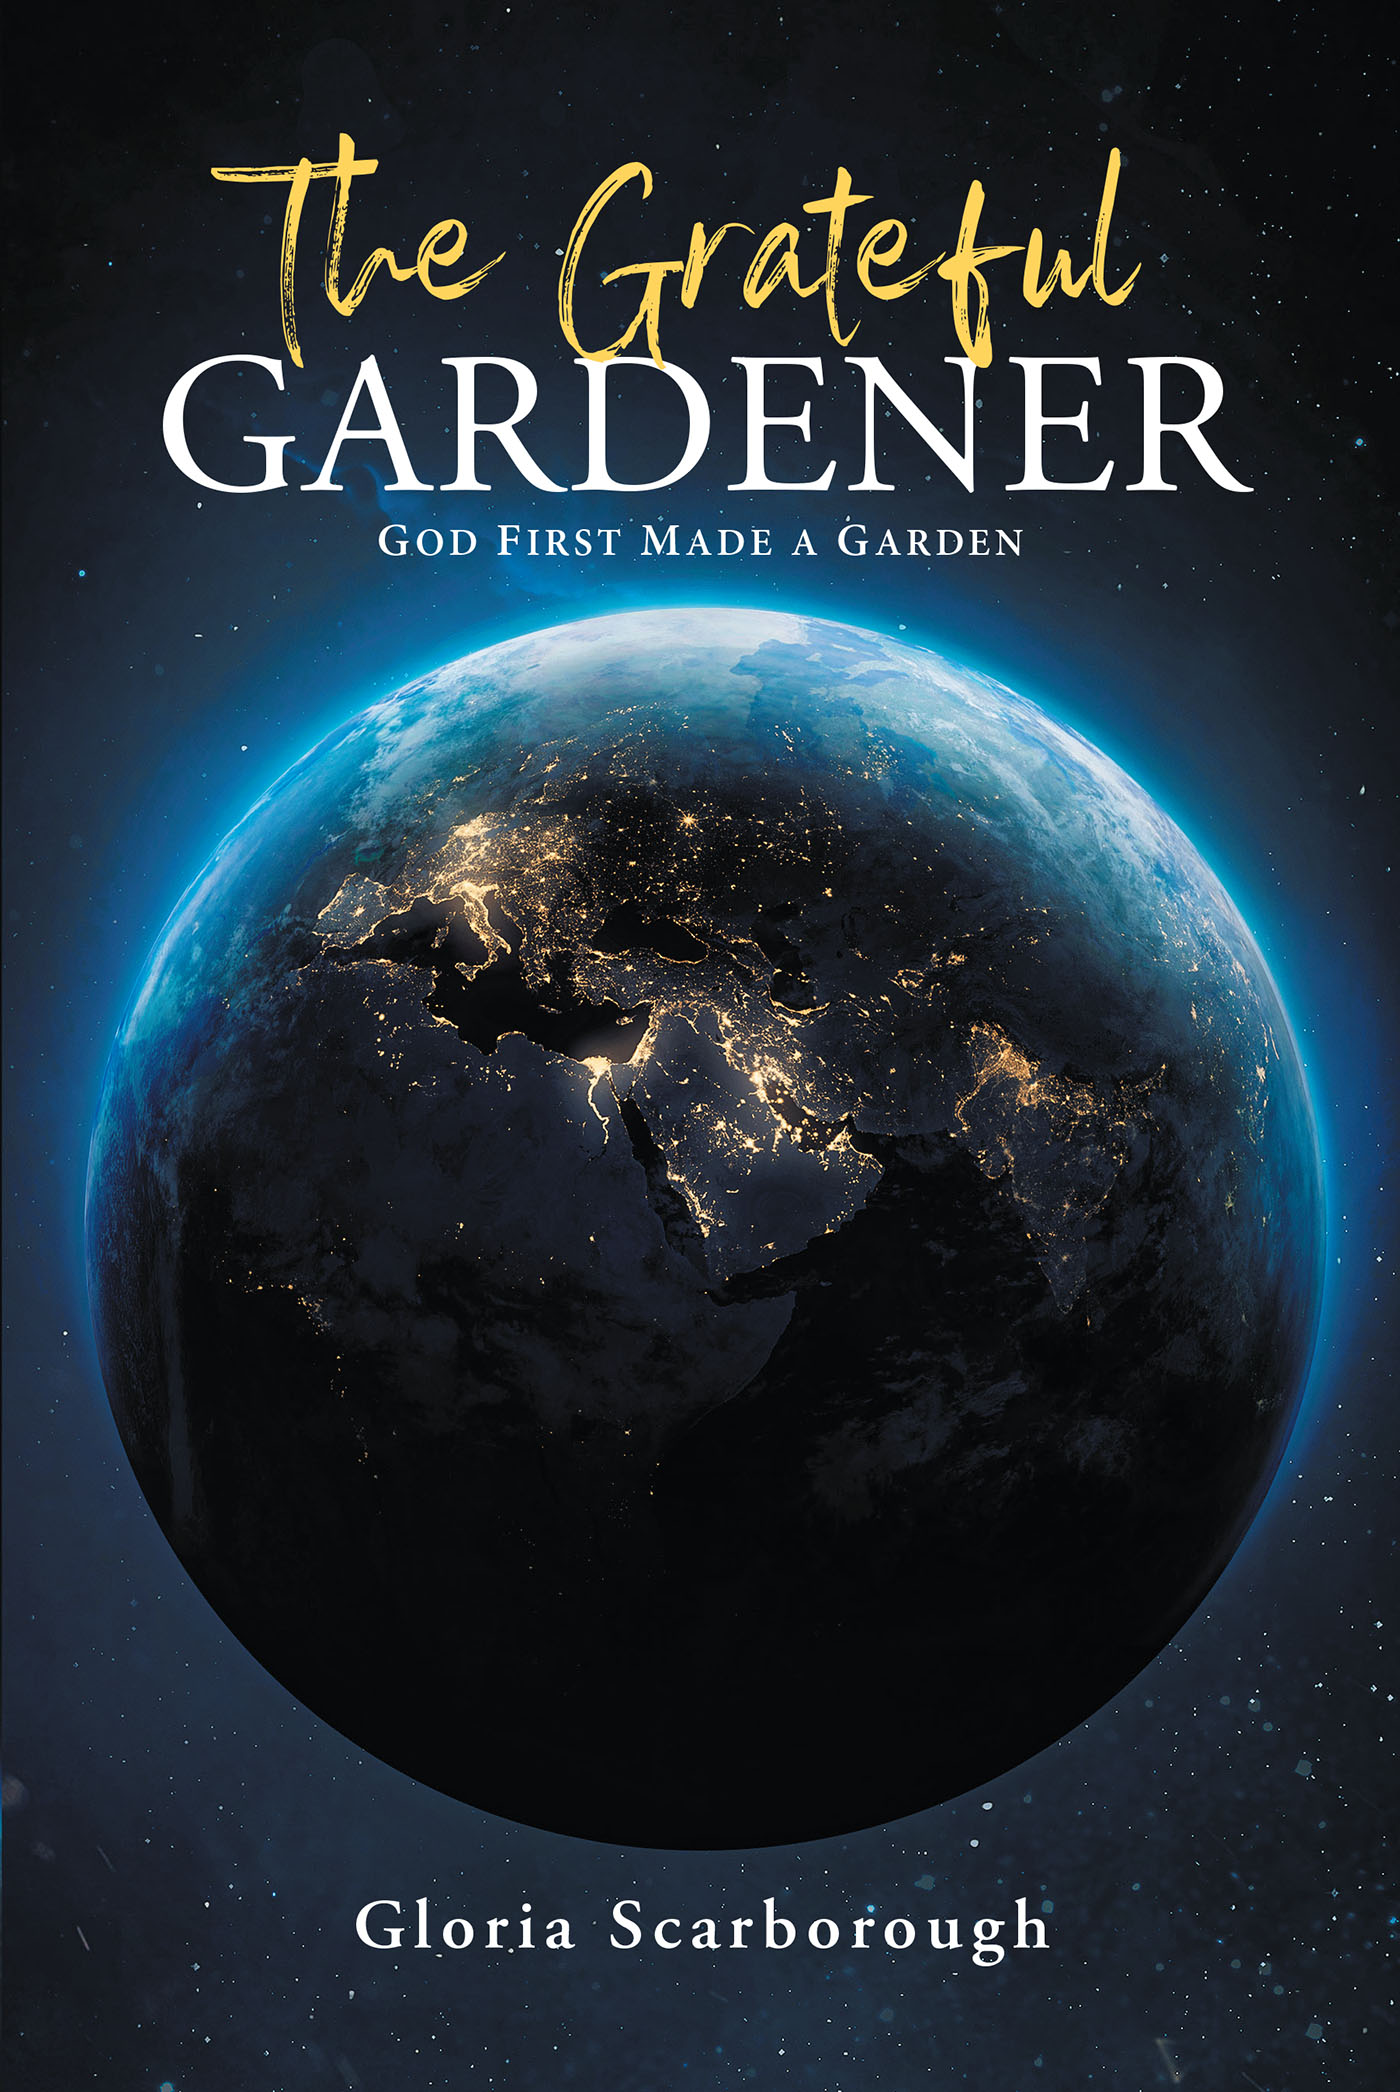 Gloria Scarborough’s New Book, "The Grateful Gardener: God First Made a Garden," is a Thoughtful and Refreshing Collection of Poetry That Showcases Nature and God